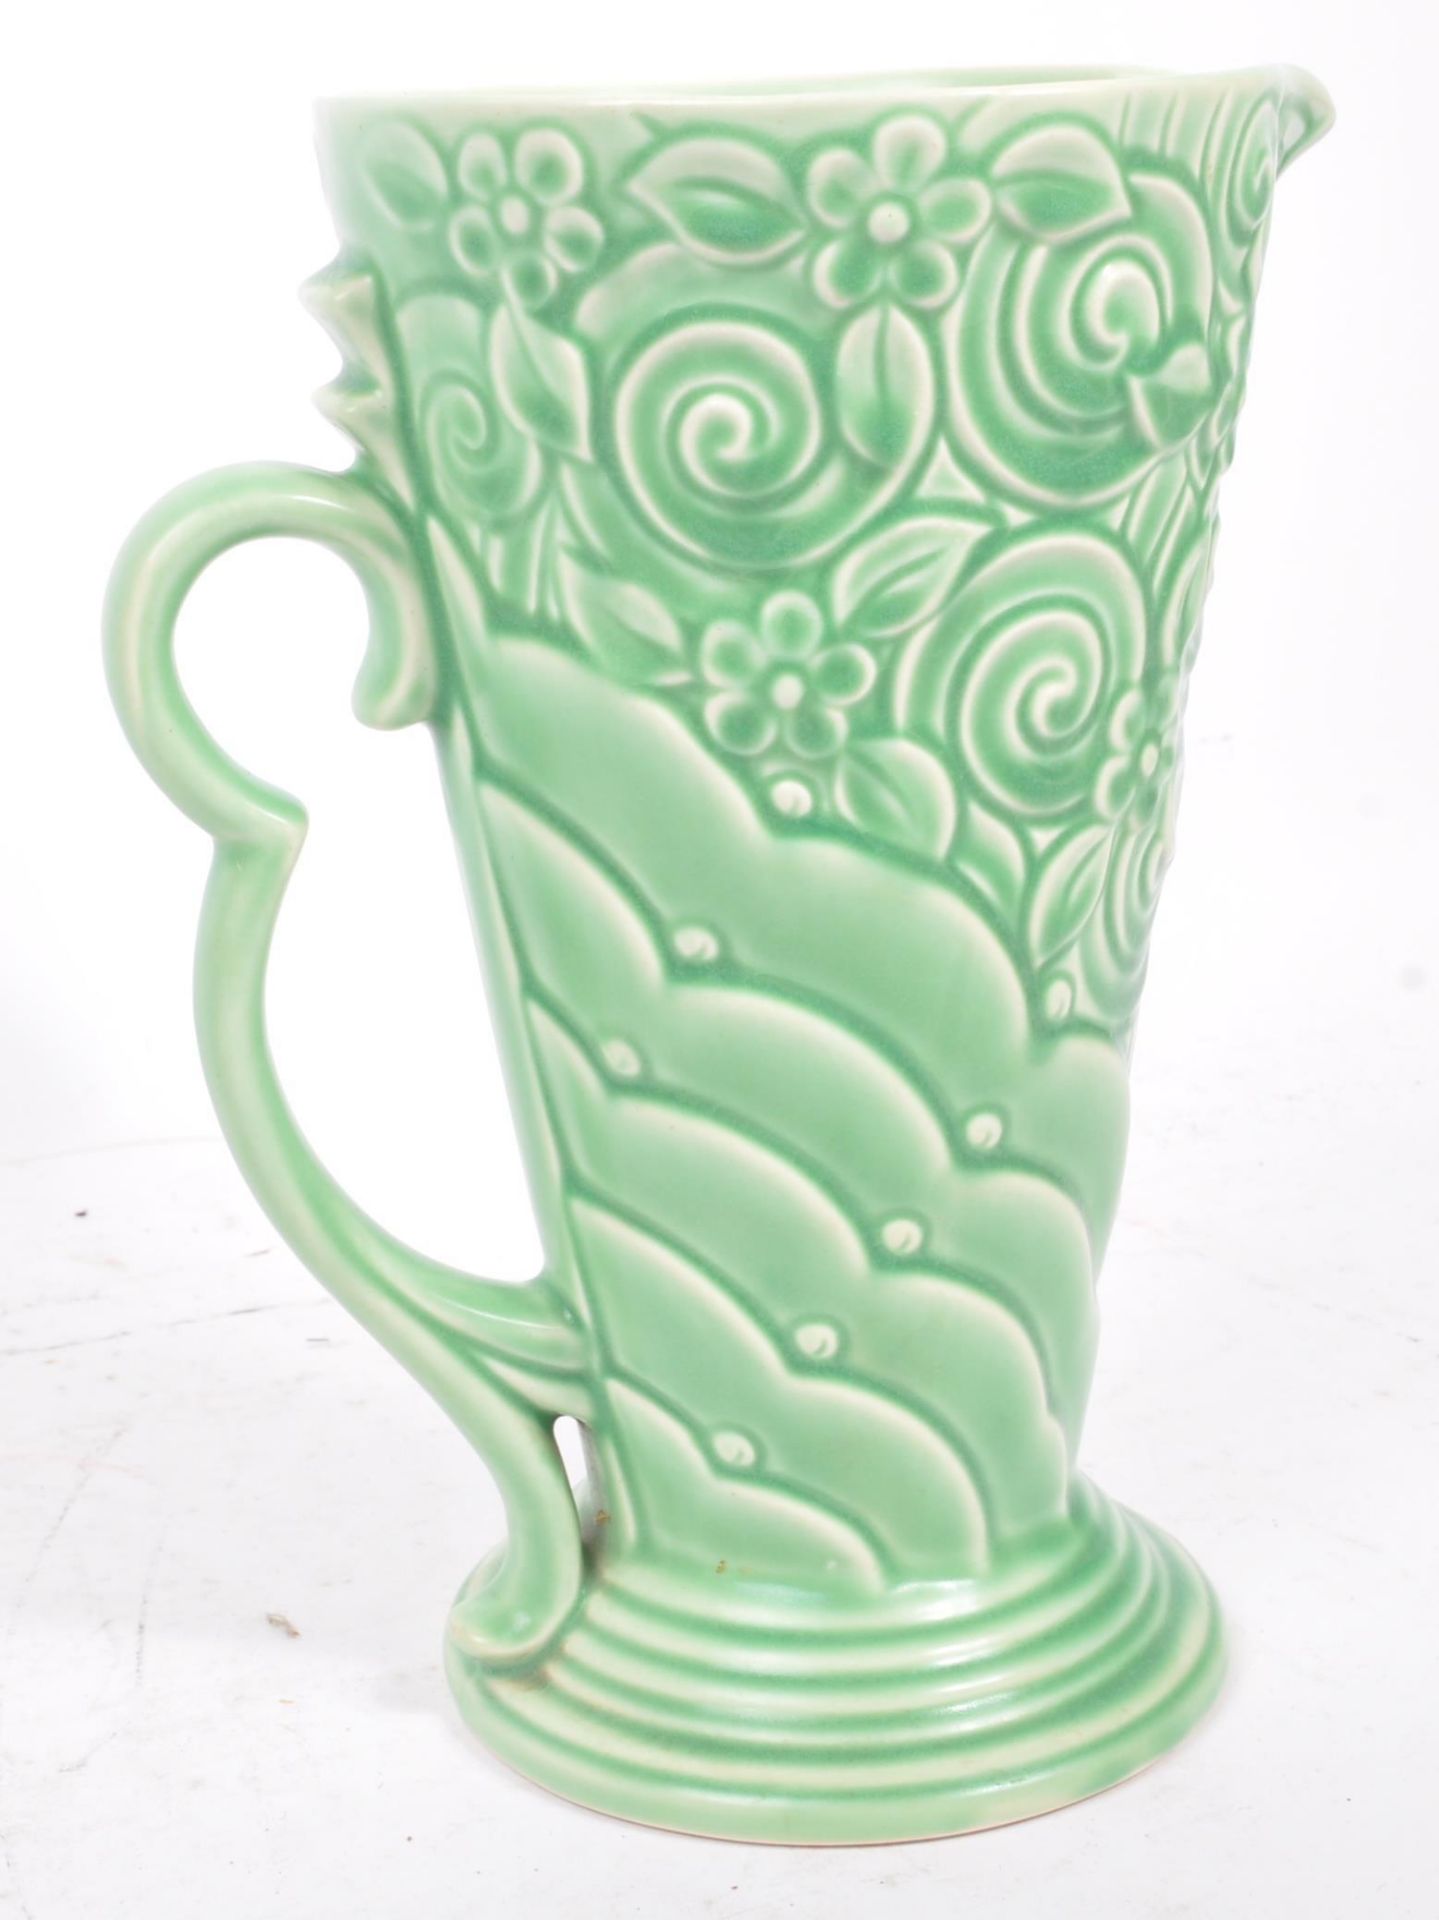 WADE - MID 20TH CENTURY PORCELAIN DECORATED JUG